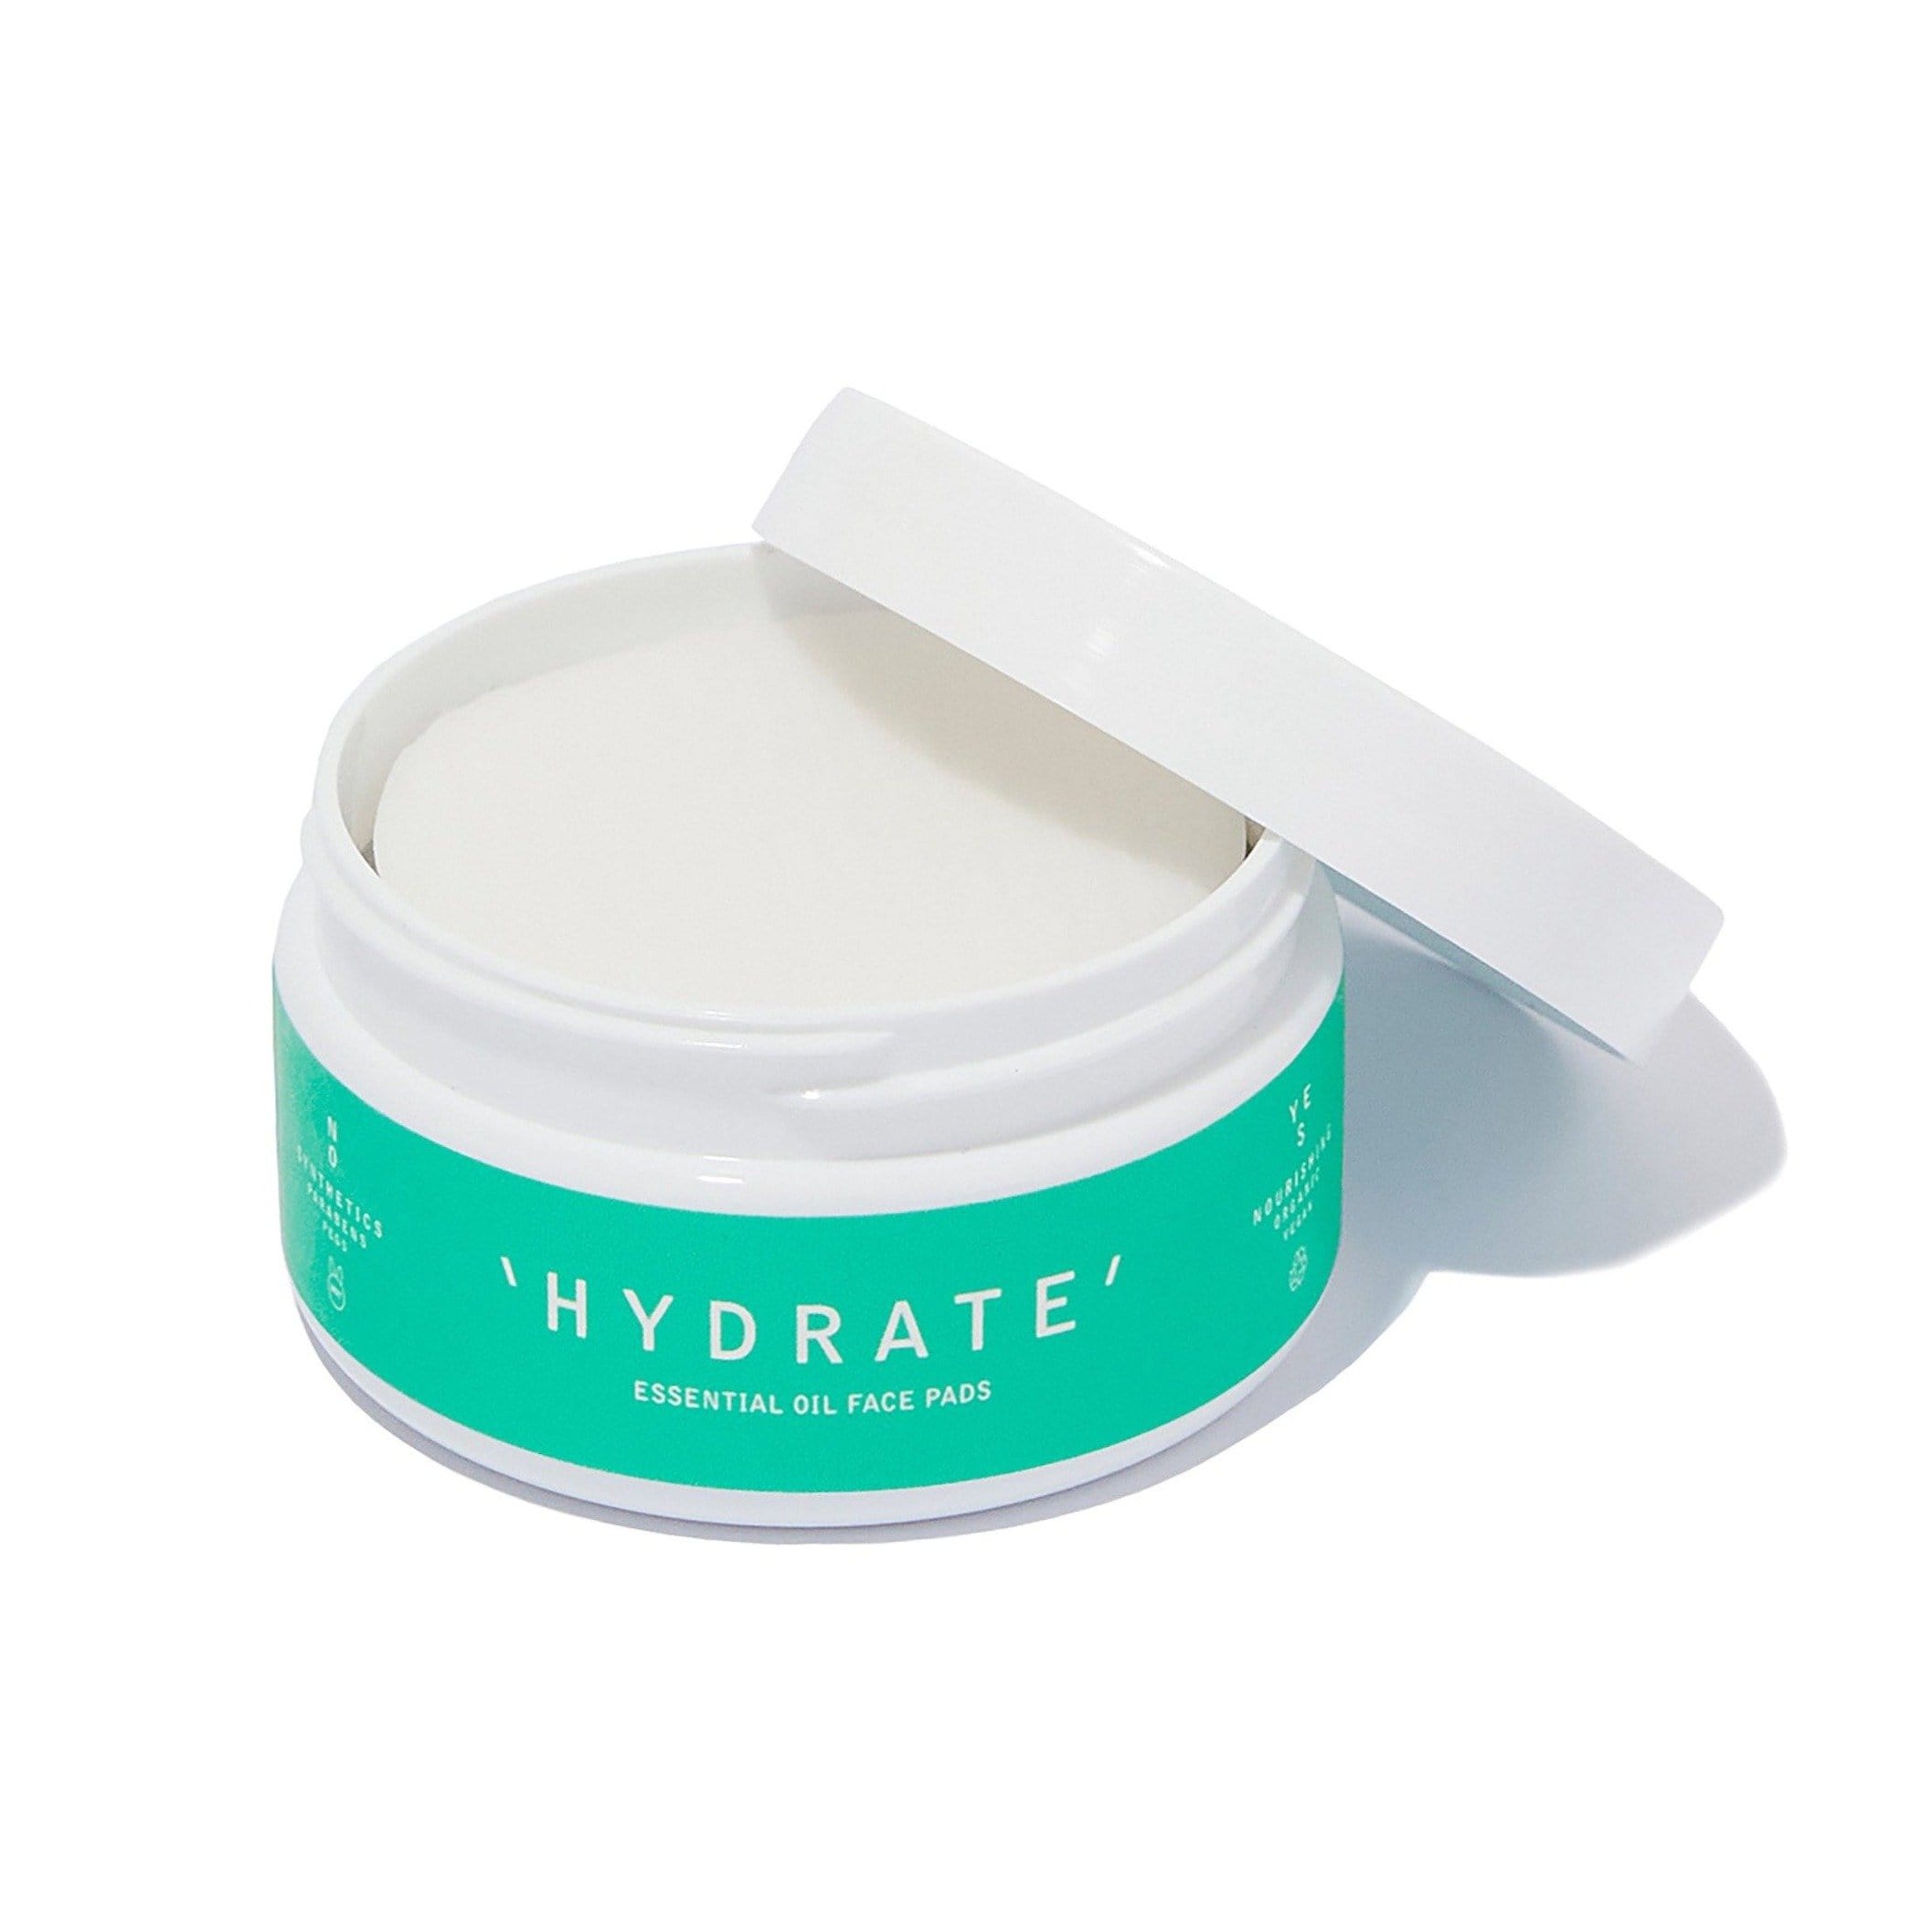 'HYDRATE' ESSENTIAL OIL FACE PADS